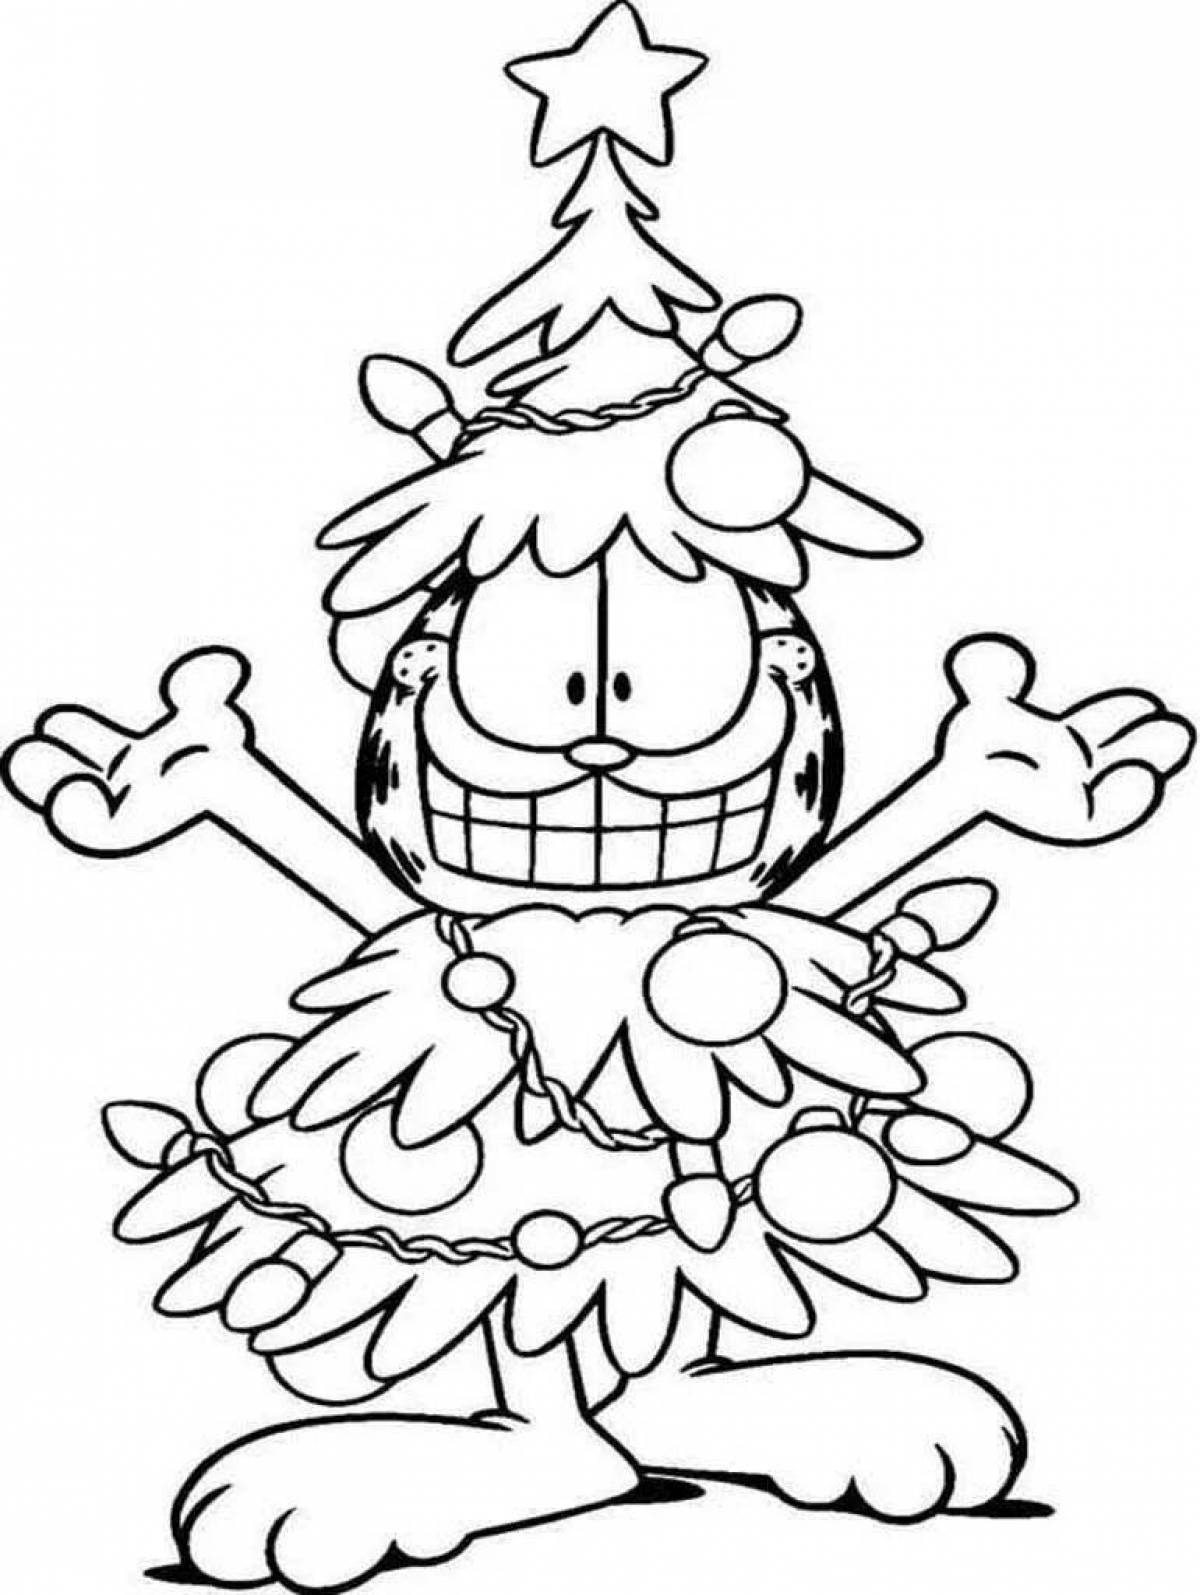 Colour-loving Christmas characters coloring book